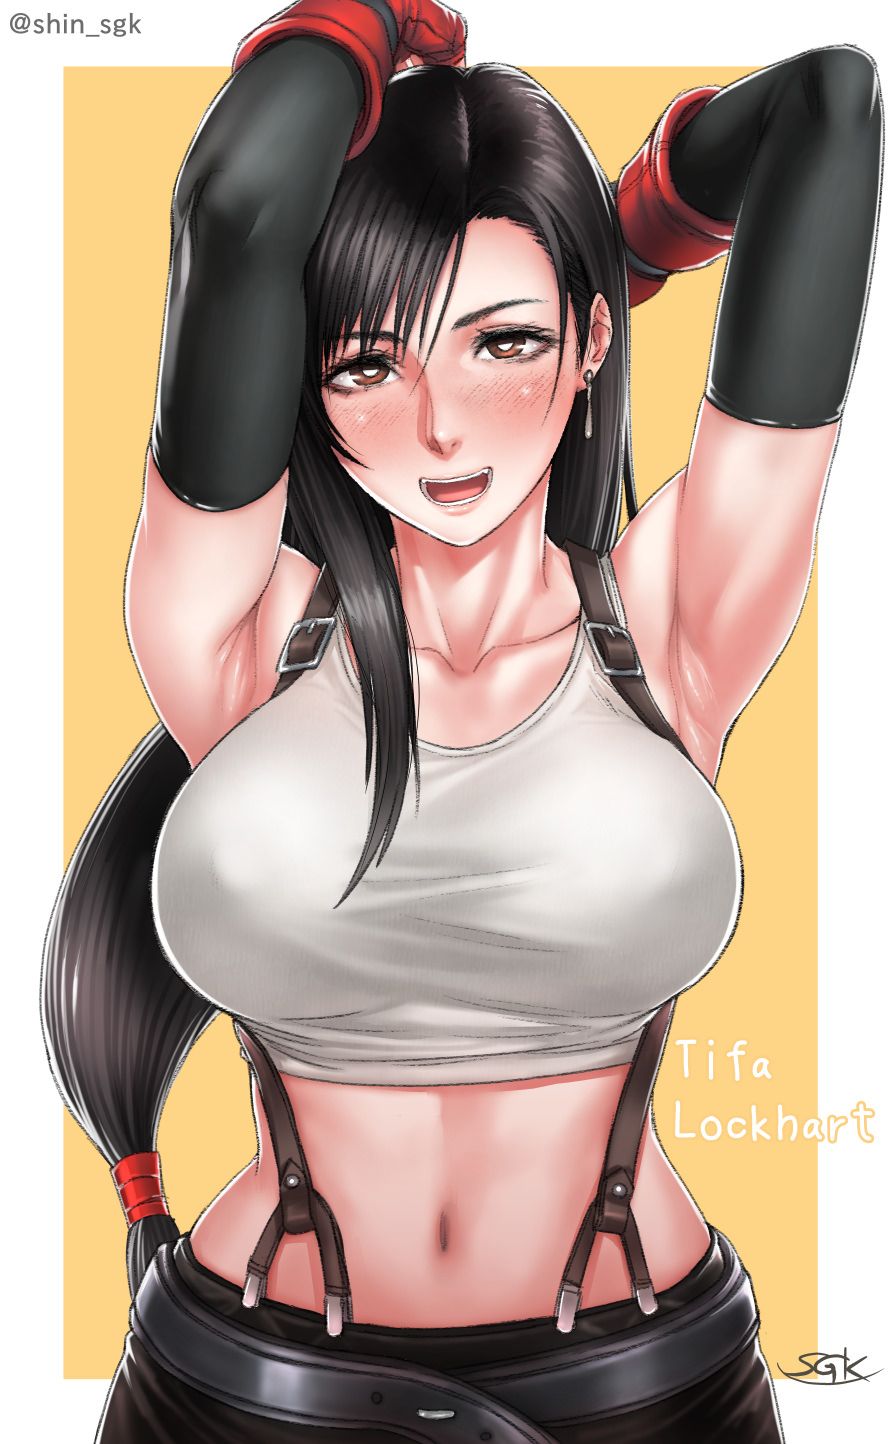 The most naughty female character in FF history is the trend of the wwwwwwww of Tifa Lockhart 7